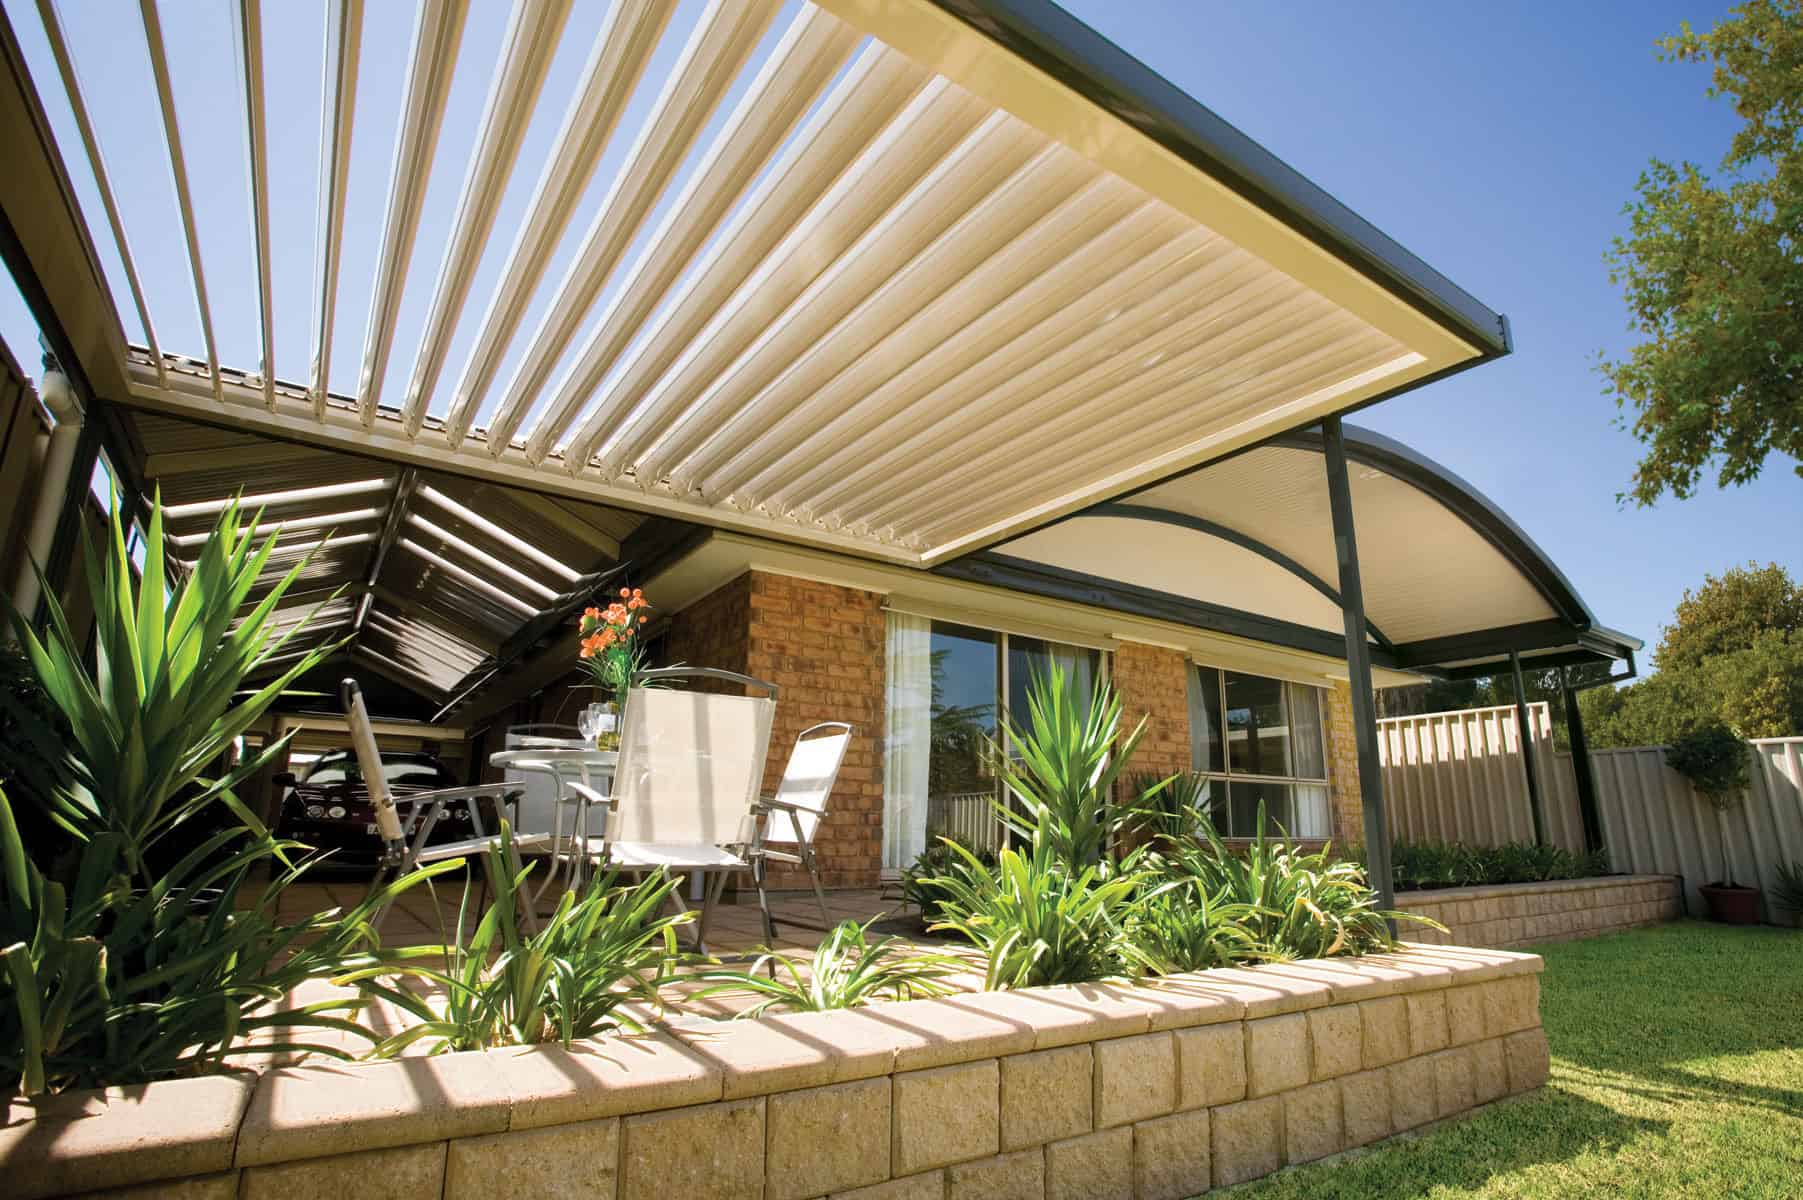 Get Your Price For Carports And Pergola Building In Randburg My Carports